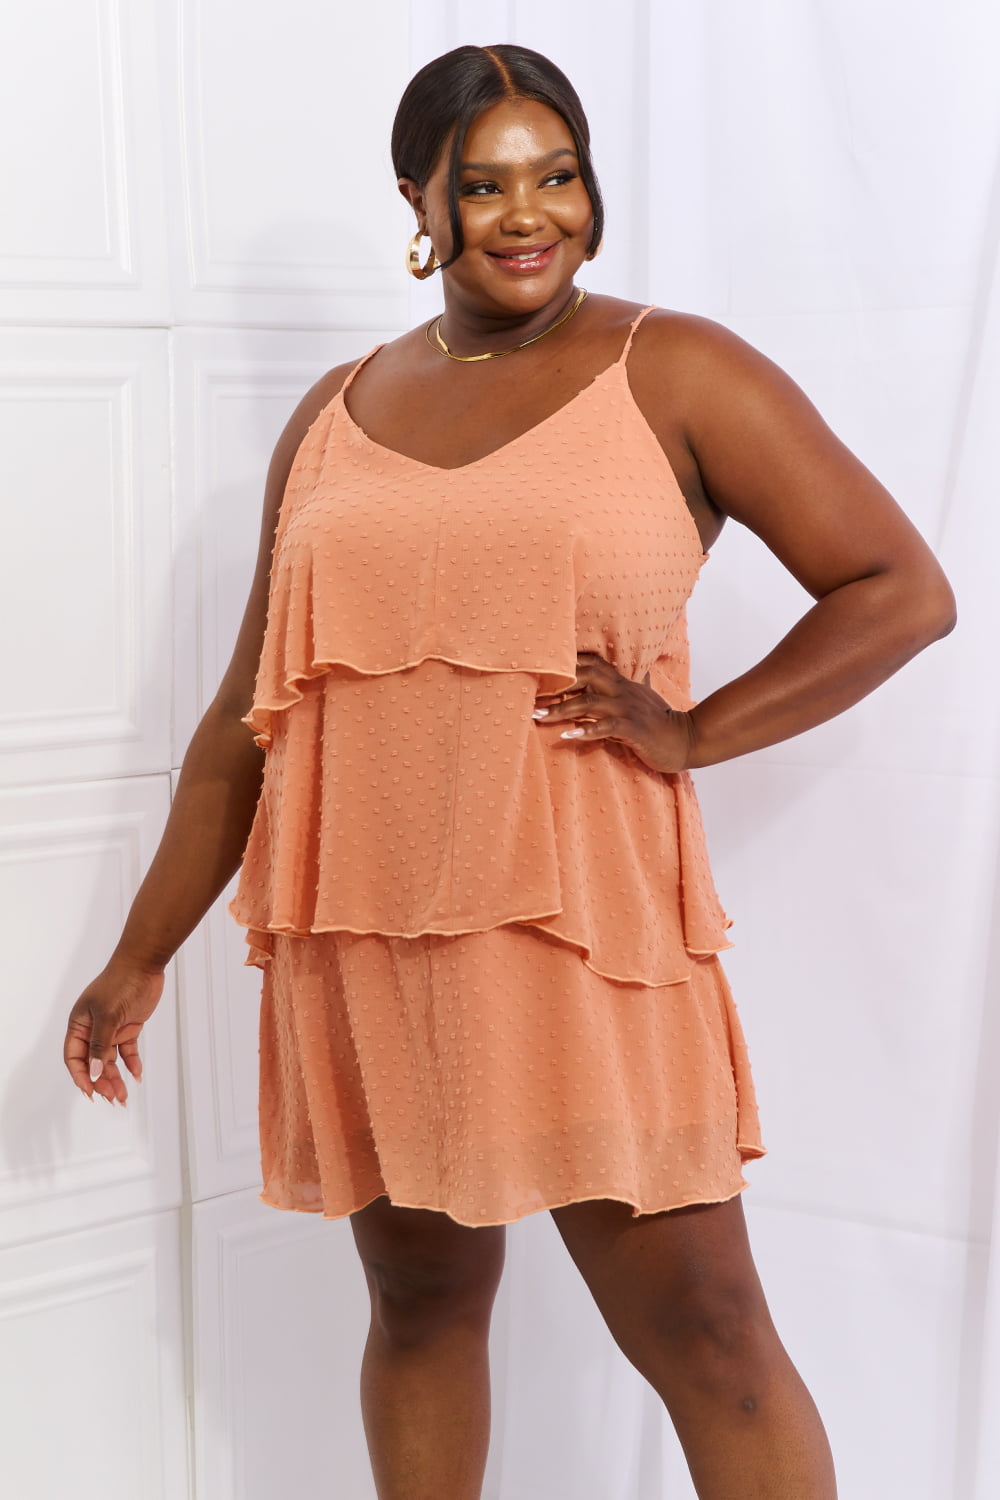 By The River Full Size Cascade Ruffle Style Cami Dress in Sherbet - All Dresses - Dresses - 6 - 2024